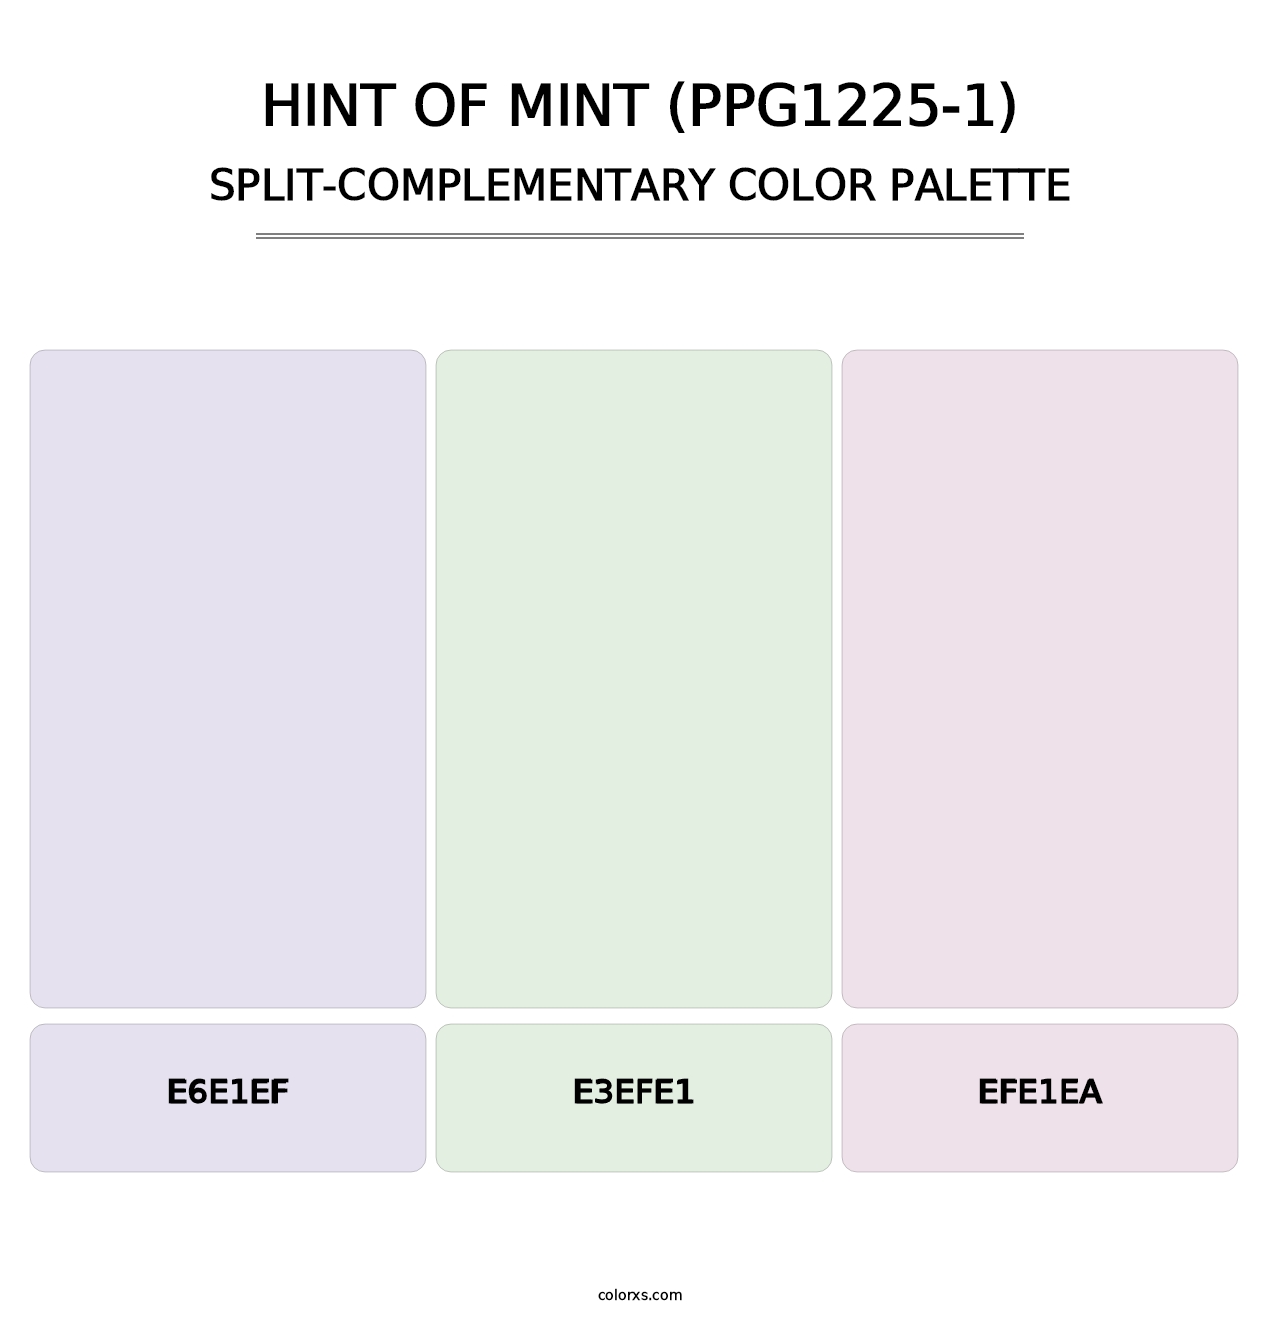 Hint Of Mint (PPG1225-1) - Split-Complementary Color Palette